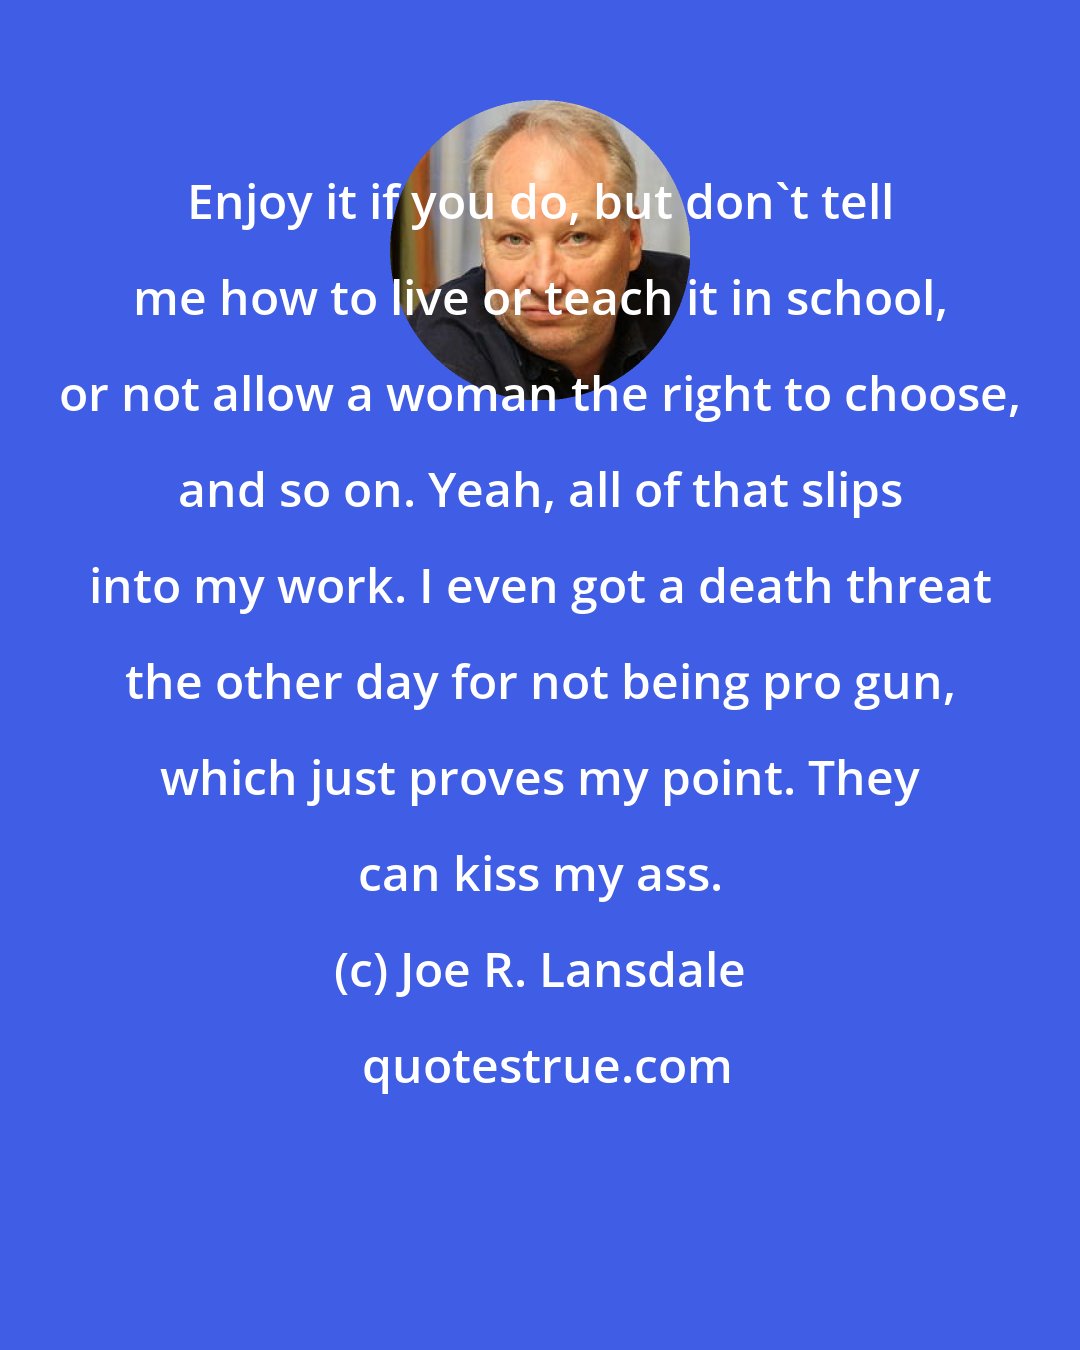 Joe R. Lansdale: Enjoy it if you do, but don't tell me how to live or teach it in school, or not allow a woman the right to choose, and so on. Yeah, all of that slips into my work. I even got a death threat the other day for not being pro gun, which just proves my point. They can kiss my ass.